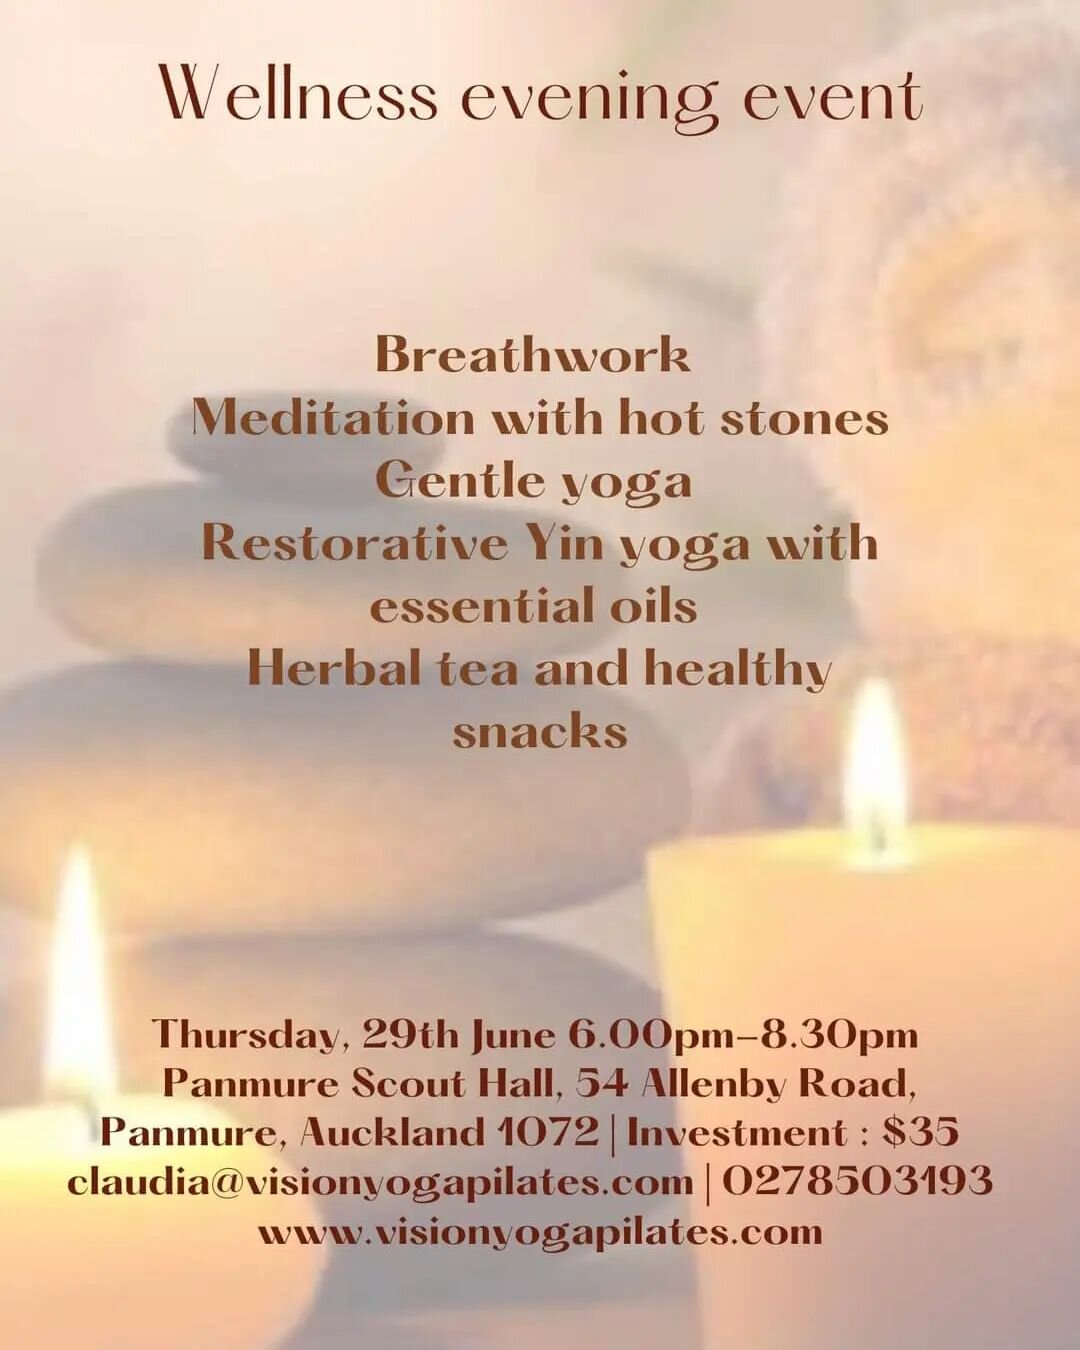 ***WELLNESS EVENING EVENT***

We are delighted to offer this wellness evening event in Panmure. During this mini evening retreat, we will start with breathwork and meditation with hot stones, followed by gentle yoga and a nourishing restorative yin y